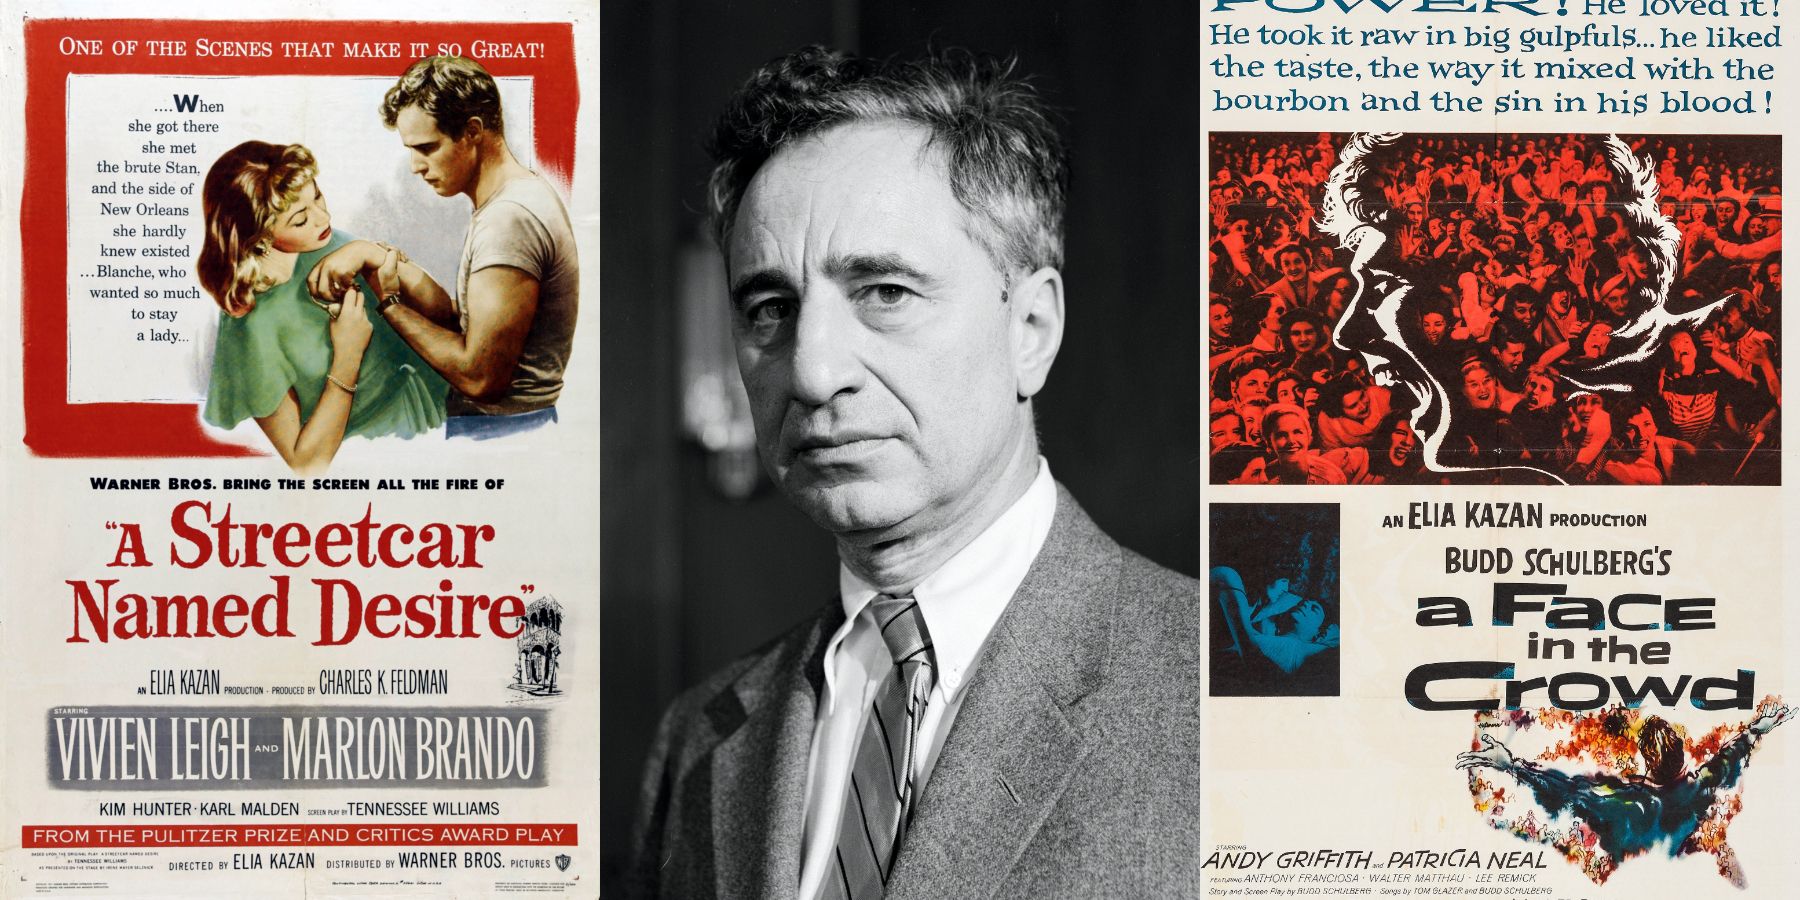 Split image of Elia Kazan and the posters for A Streetcar Named Desire and A Face in the Crowd